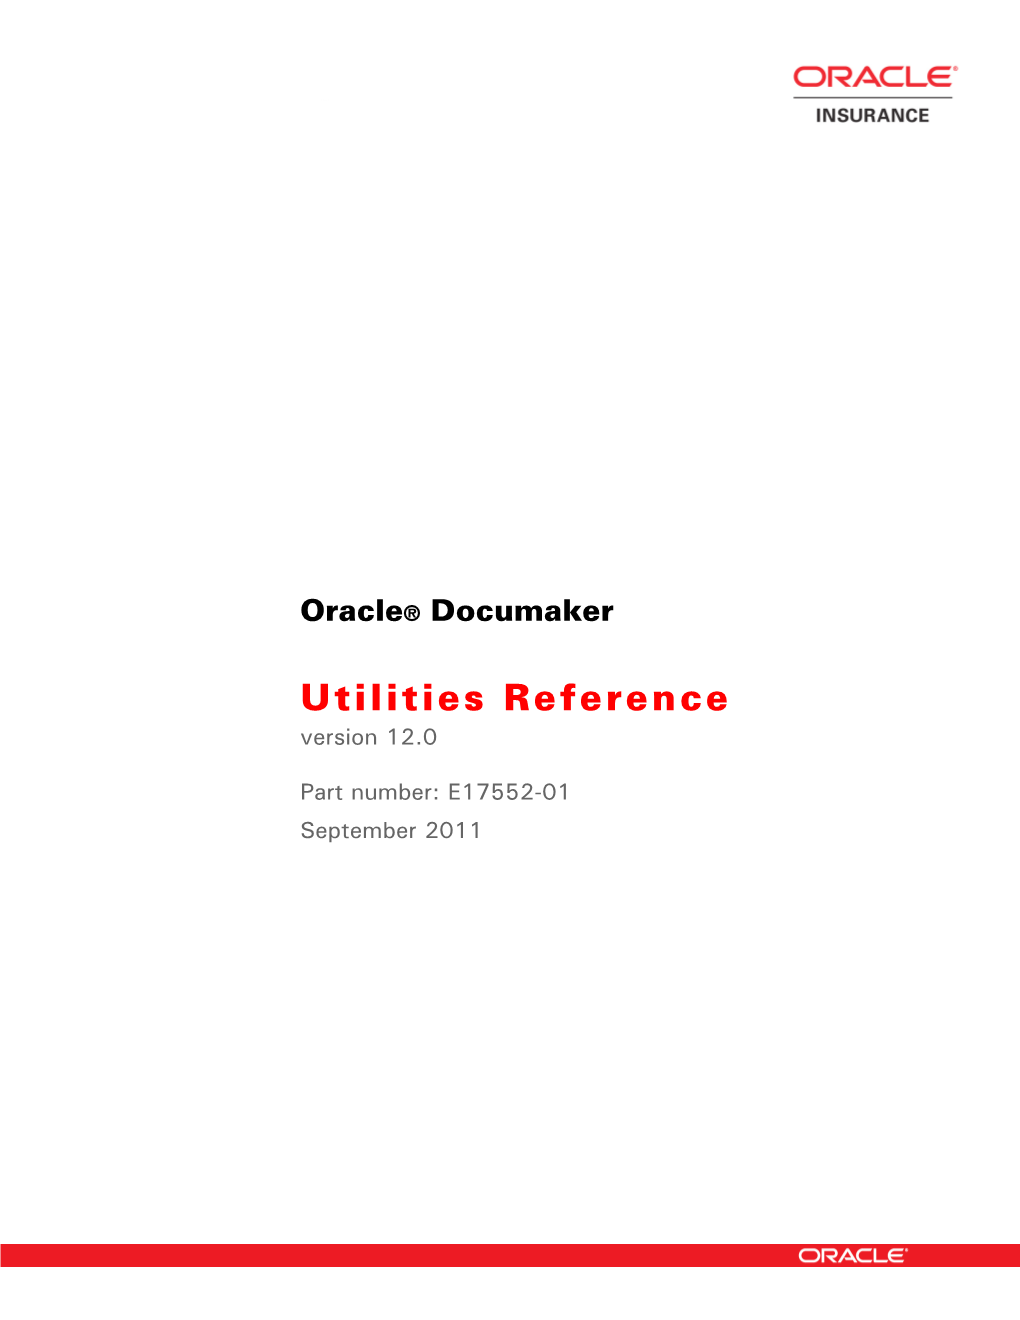 Utilities Reference Version 12.0